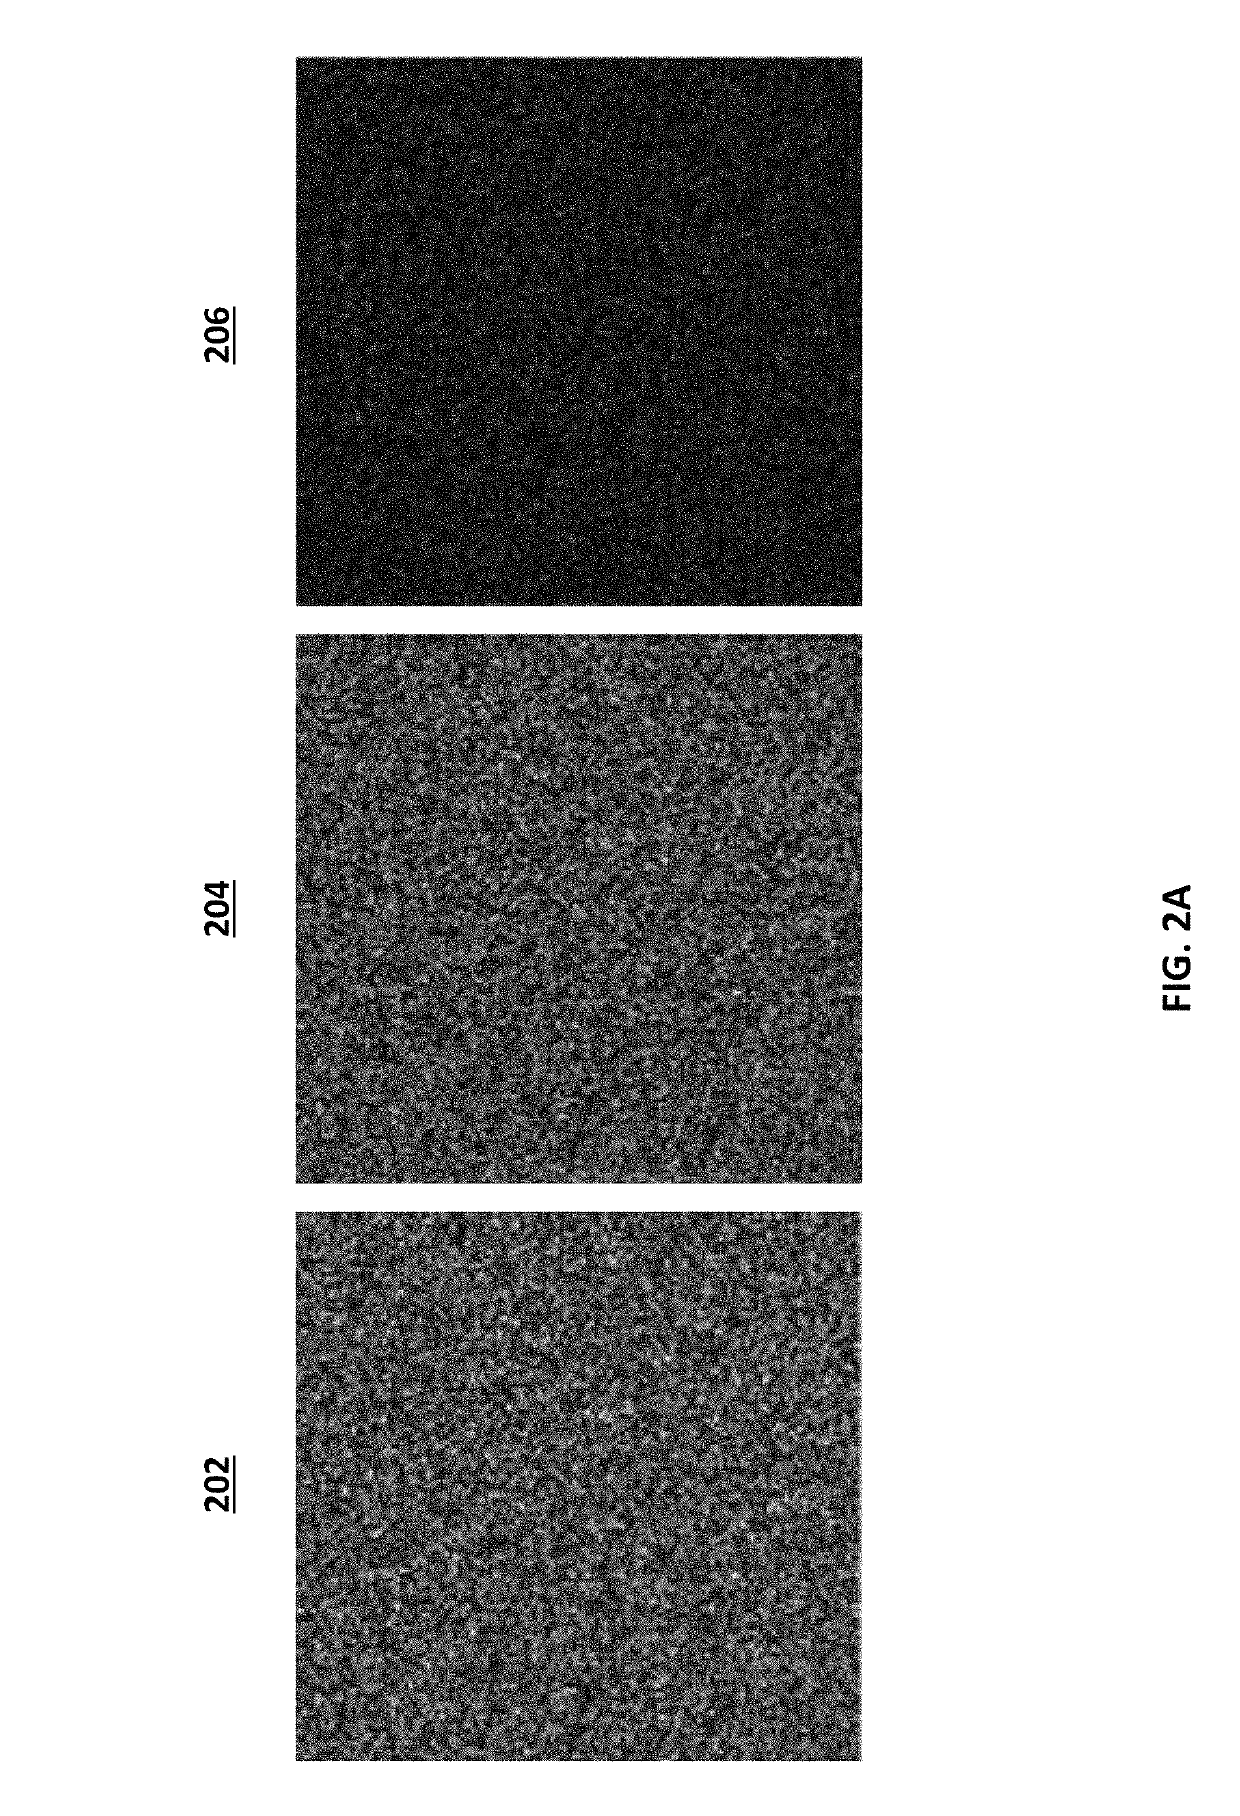 System and method for noise-based training of a prediction model